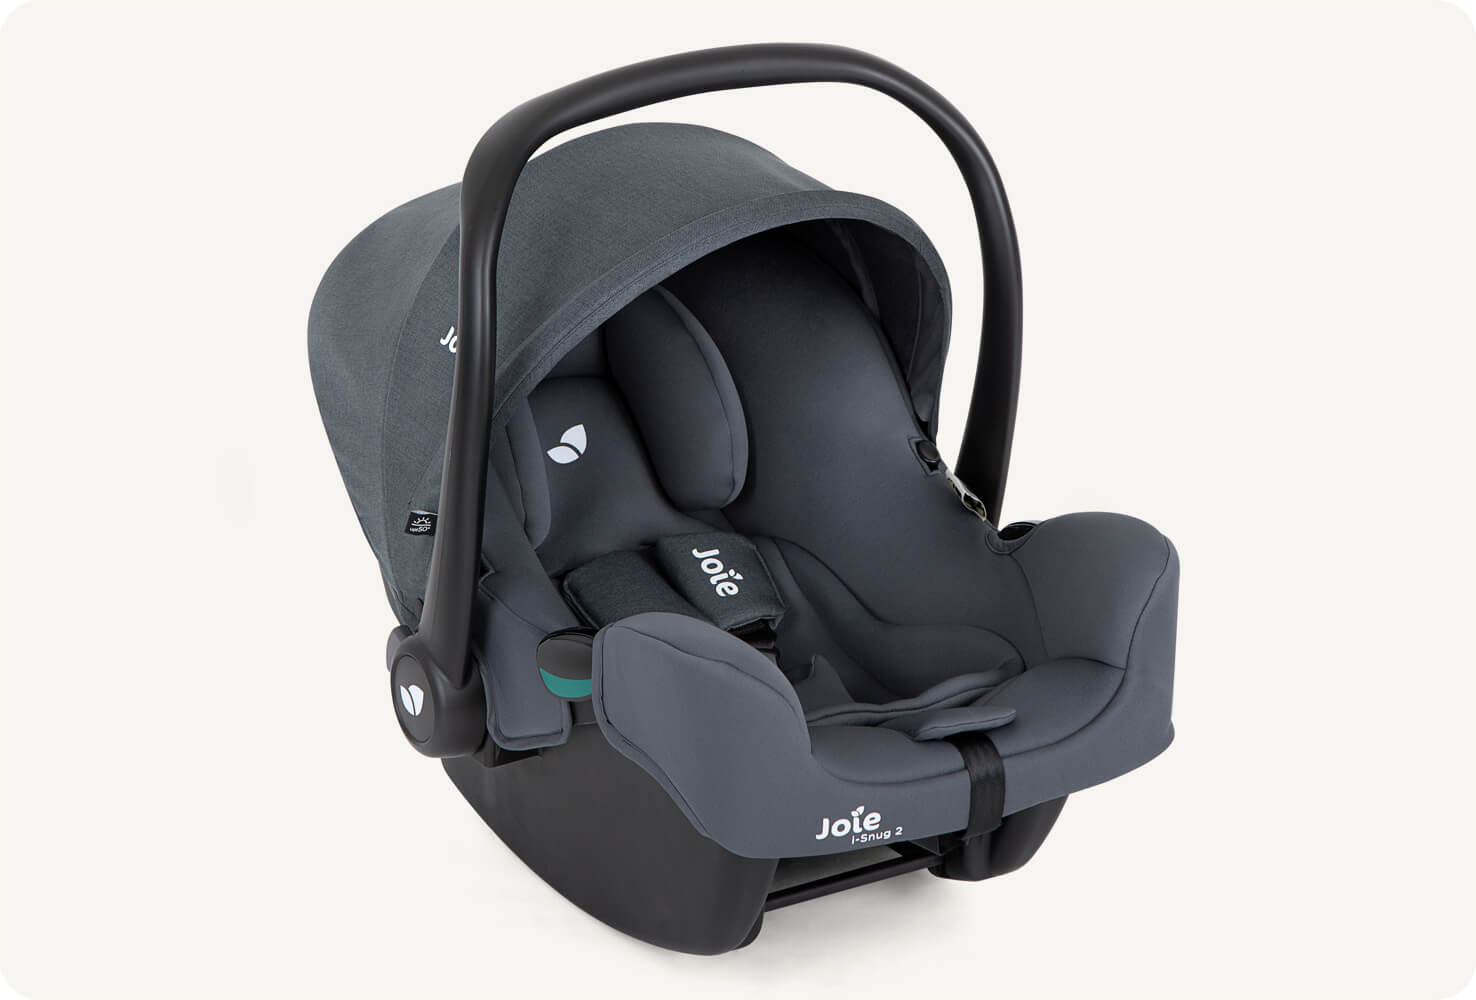 The Joie i-Snug 2 infant carrier in blue at an angle facing to the right.
